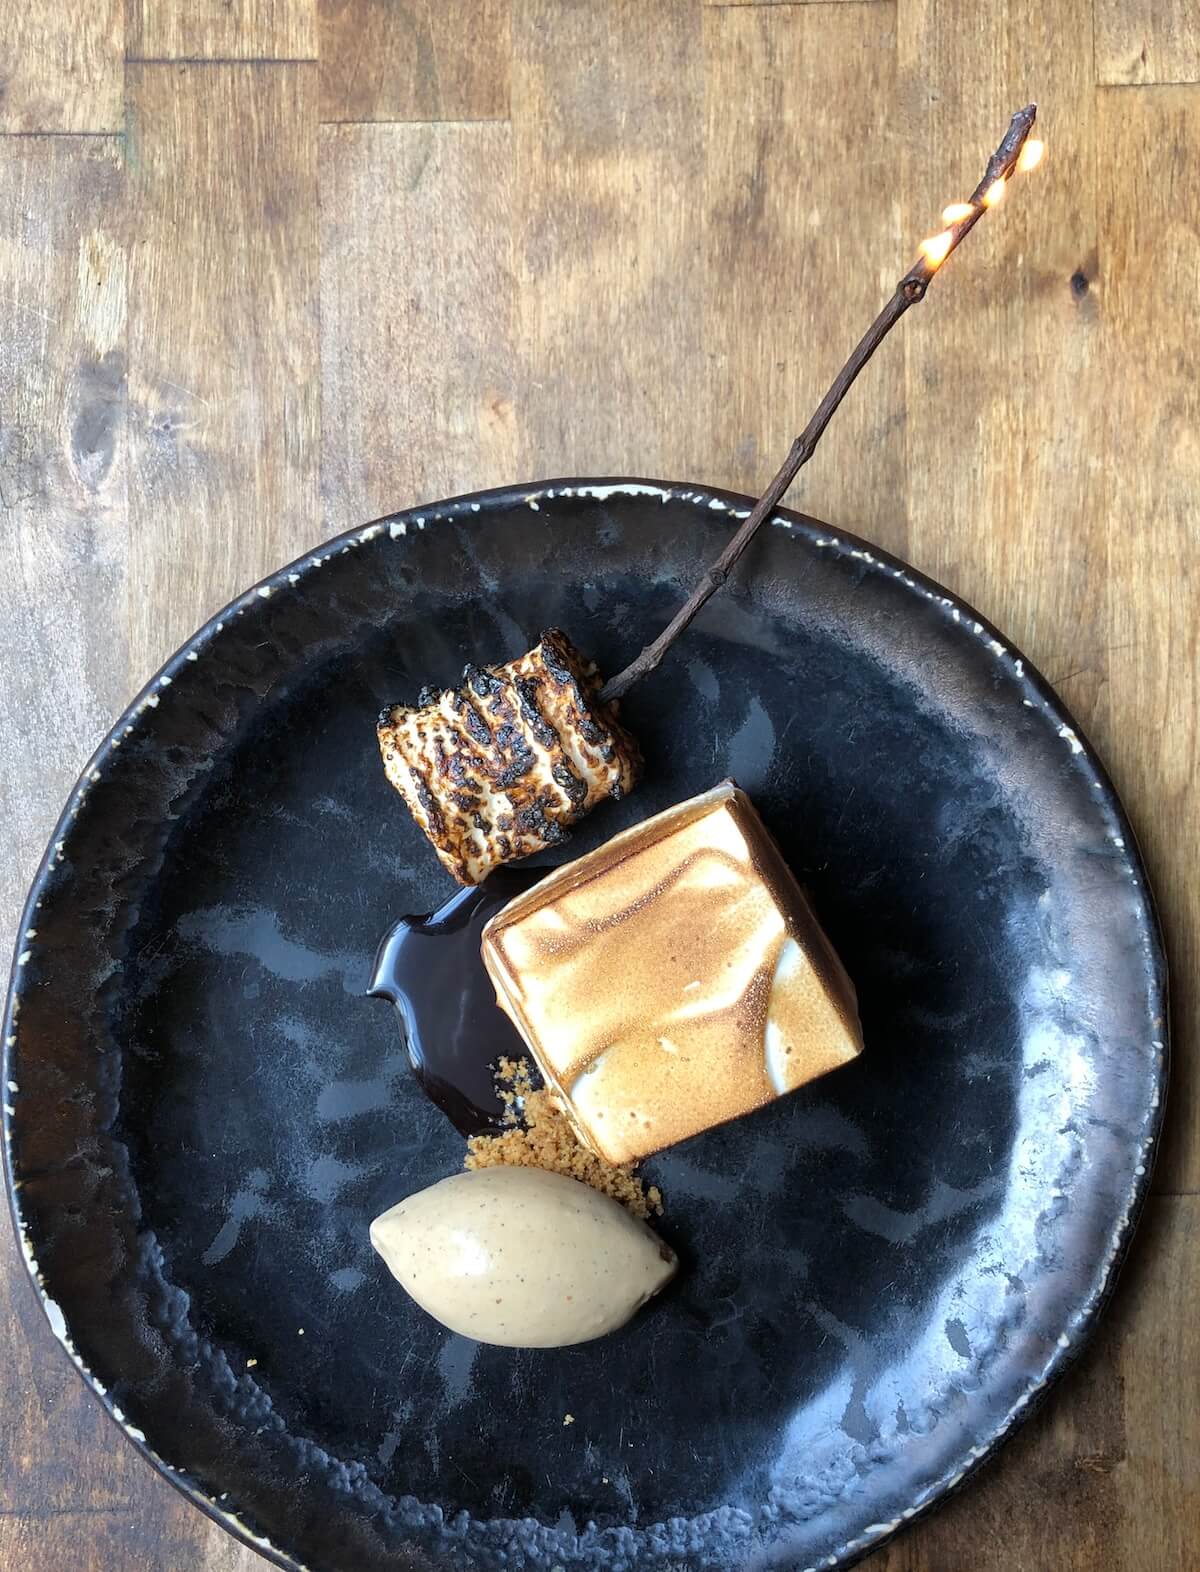 plated s'mores dessert on black plate.